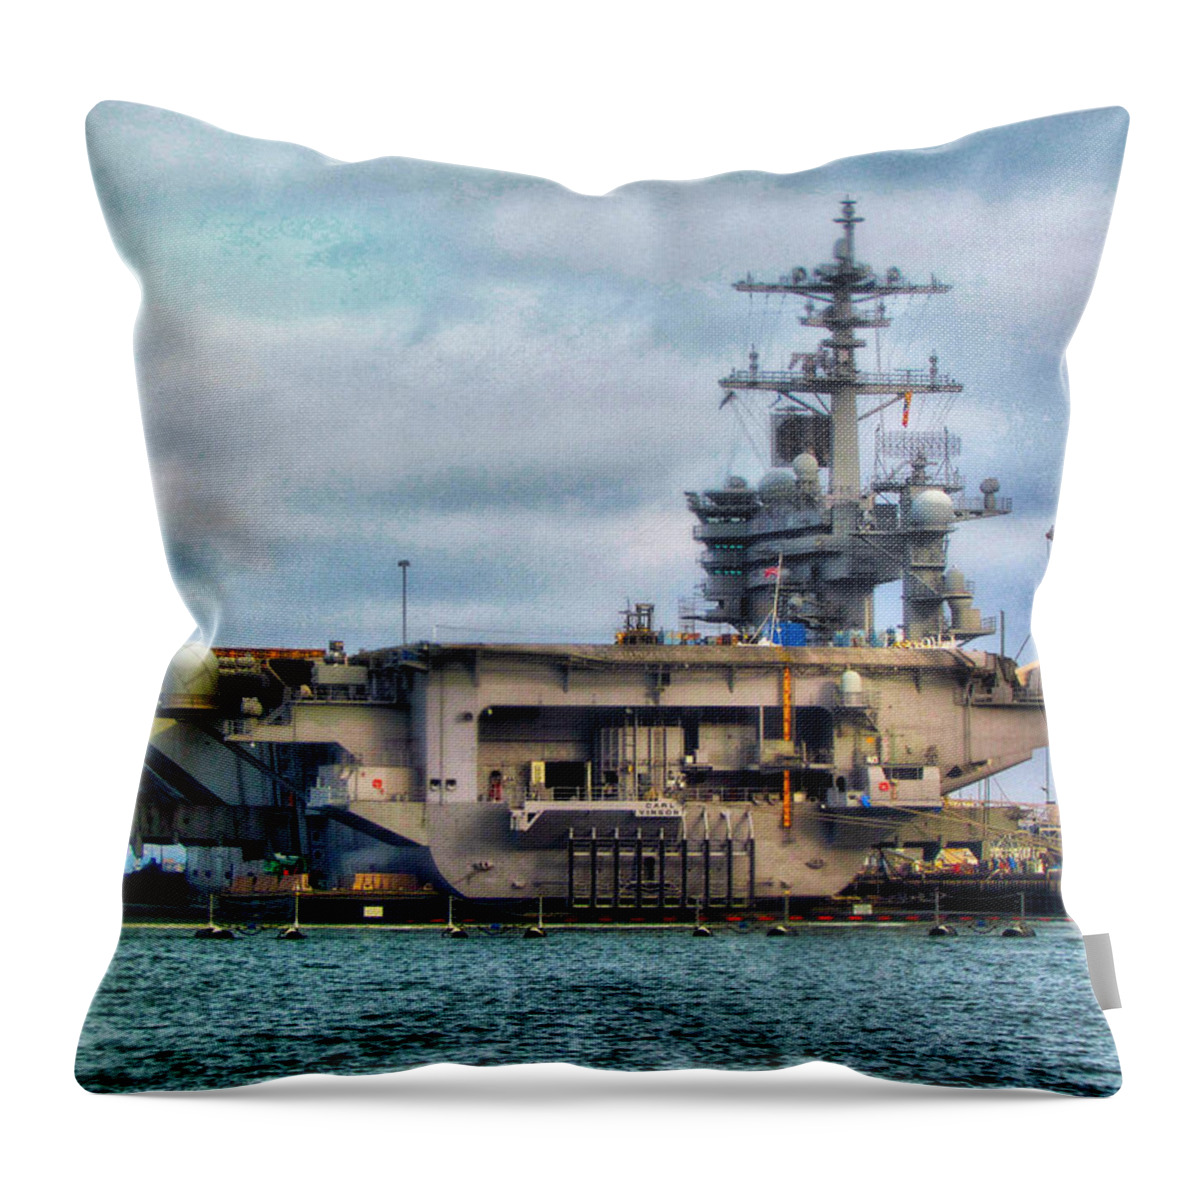 San Diego Throw Pillow featuring the photograph USS Midway Aircraft Carrier by Barbara Zahno